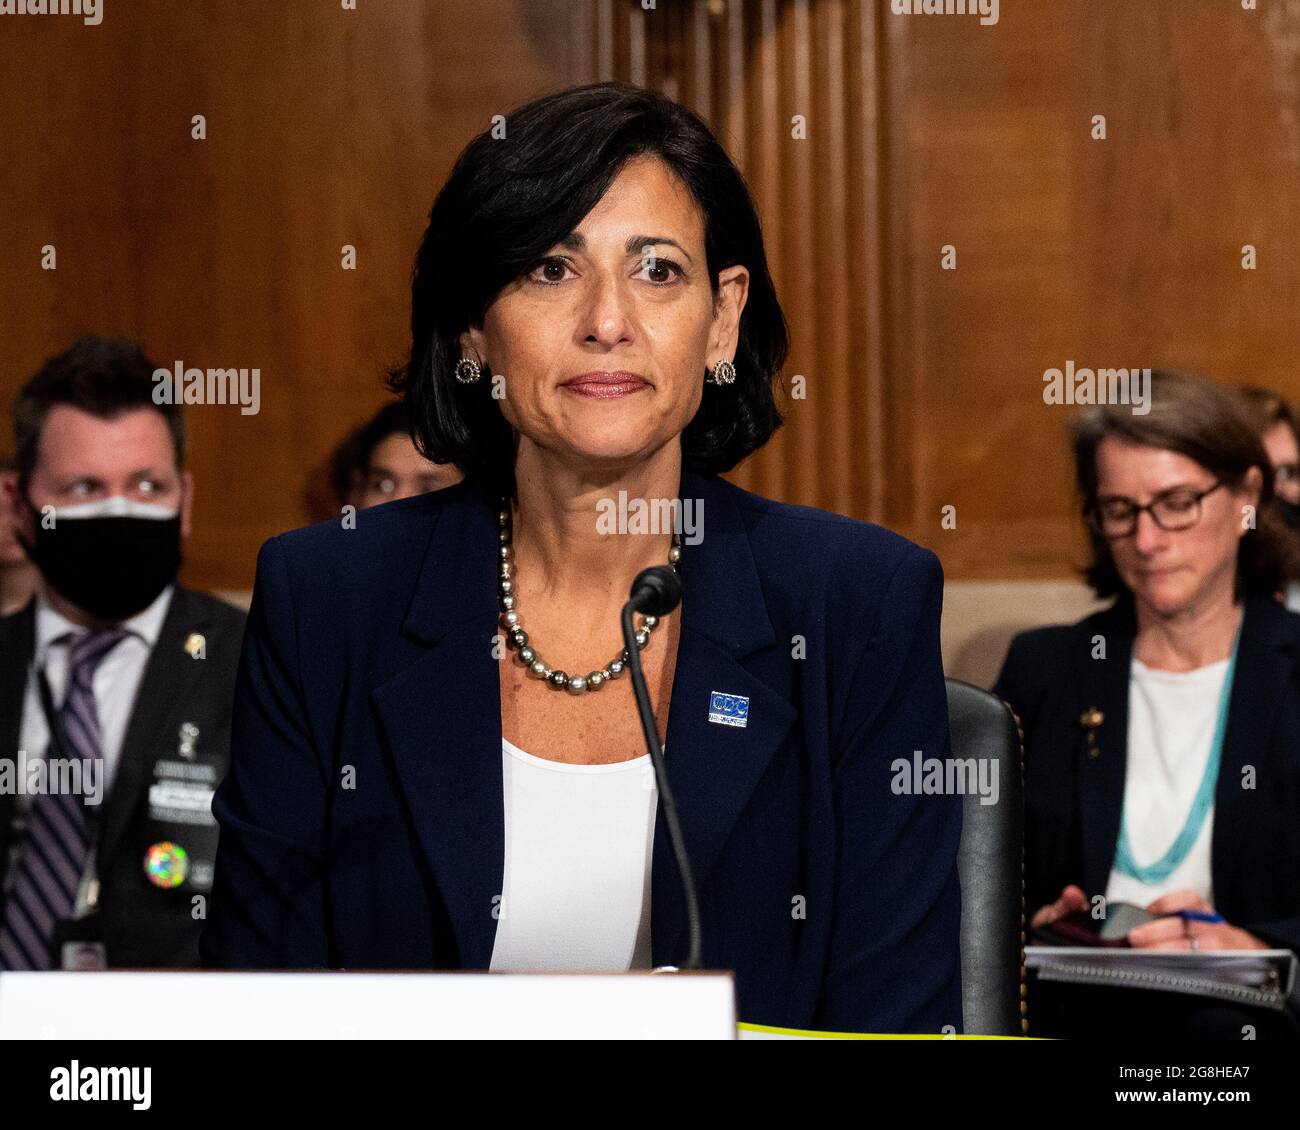 Washington, U.S. 20th July, 2021. July 20, 2021 - Washington, DC, United States: Dr. Rochelle Walensky, Director of the Centers for Disease Control and Prevention, at a hearing of the Senate Health, Education, Labor, and Pensions Committee. (Photo by Michael Brochstein/Sipa USA) Credit: Sipa USA/Alamy Live News Stock Photo